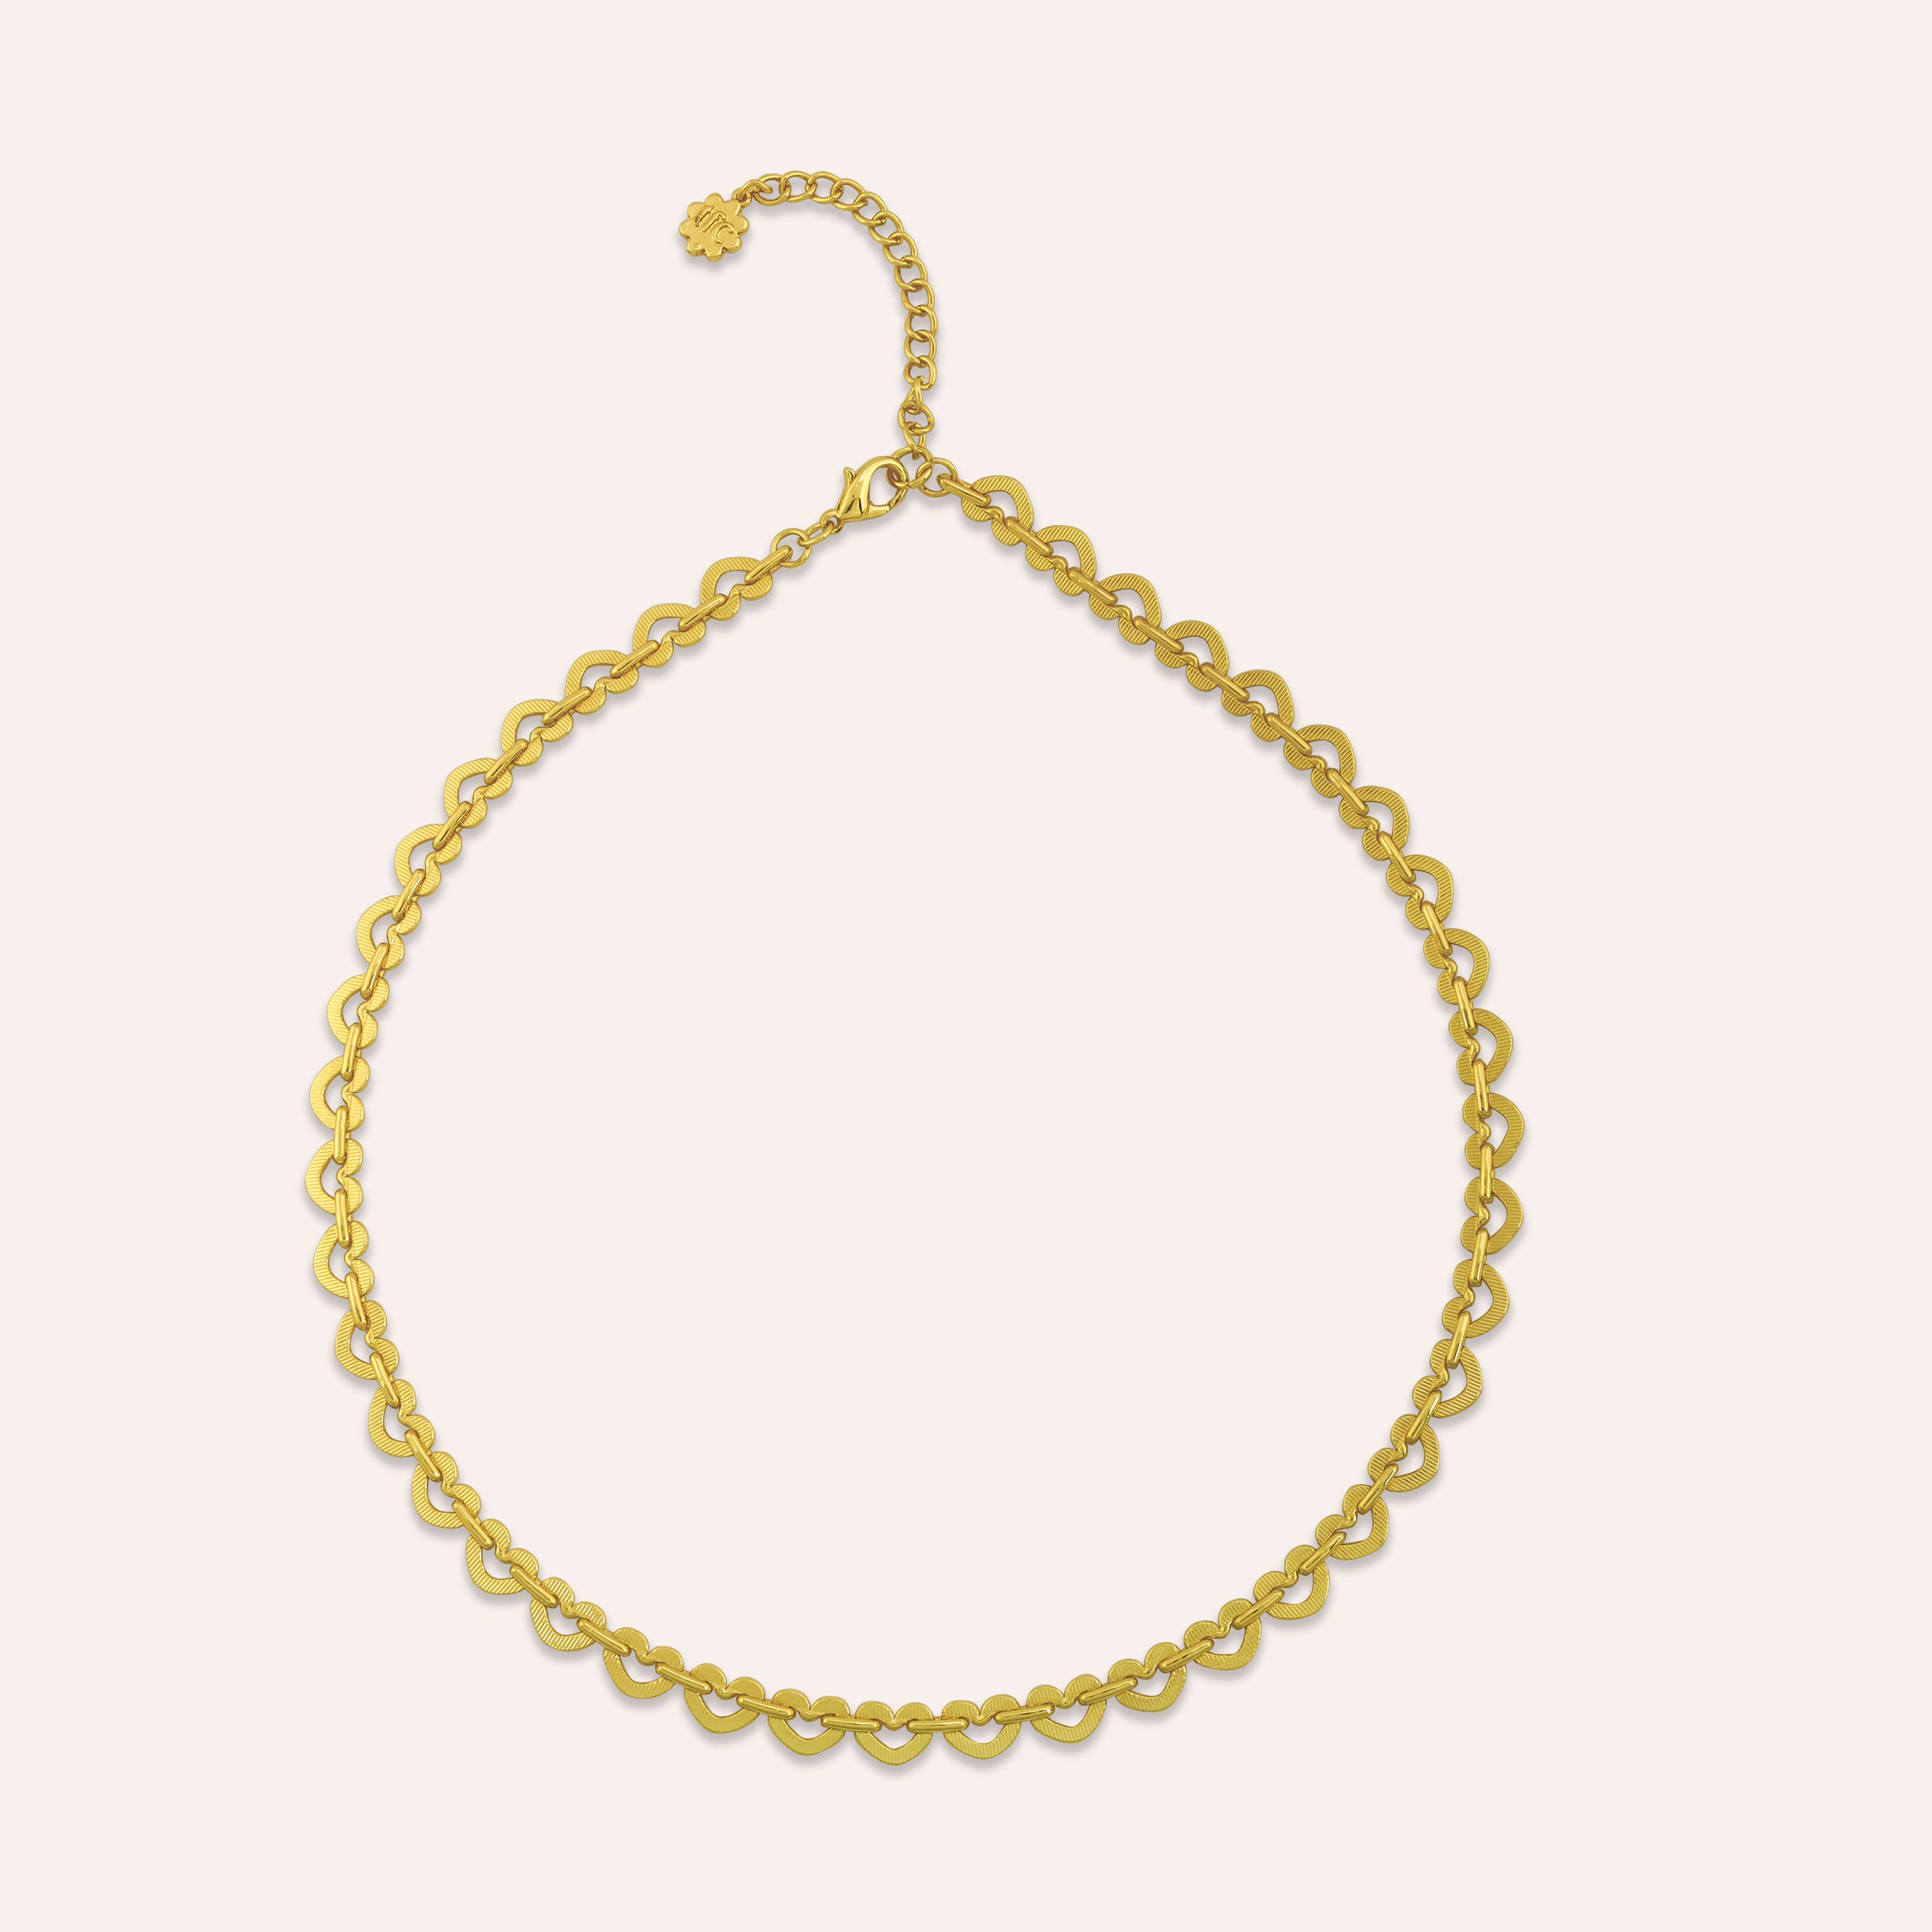 TFC Link Heart Gold Plated Chain Necklace-Enhance your elegance with our collection of gold-plated necklaces for women. Choose from stunning pendant necklaces, chic choker necklaces, and trendy layered necklaces. Our sleek and dainty designs are both affordable and anti-tarnish, ensuring lasting beauty. Enjoy the cheapest fashion jewellery, lightweight and stylish- only at The Fun Company